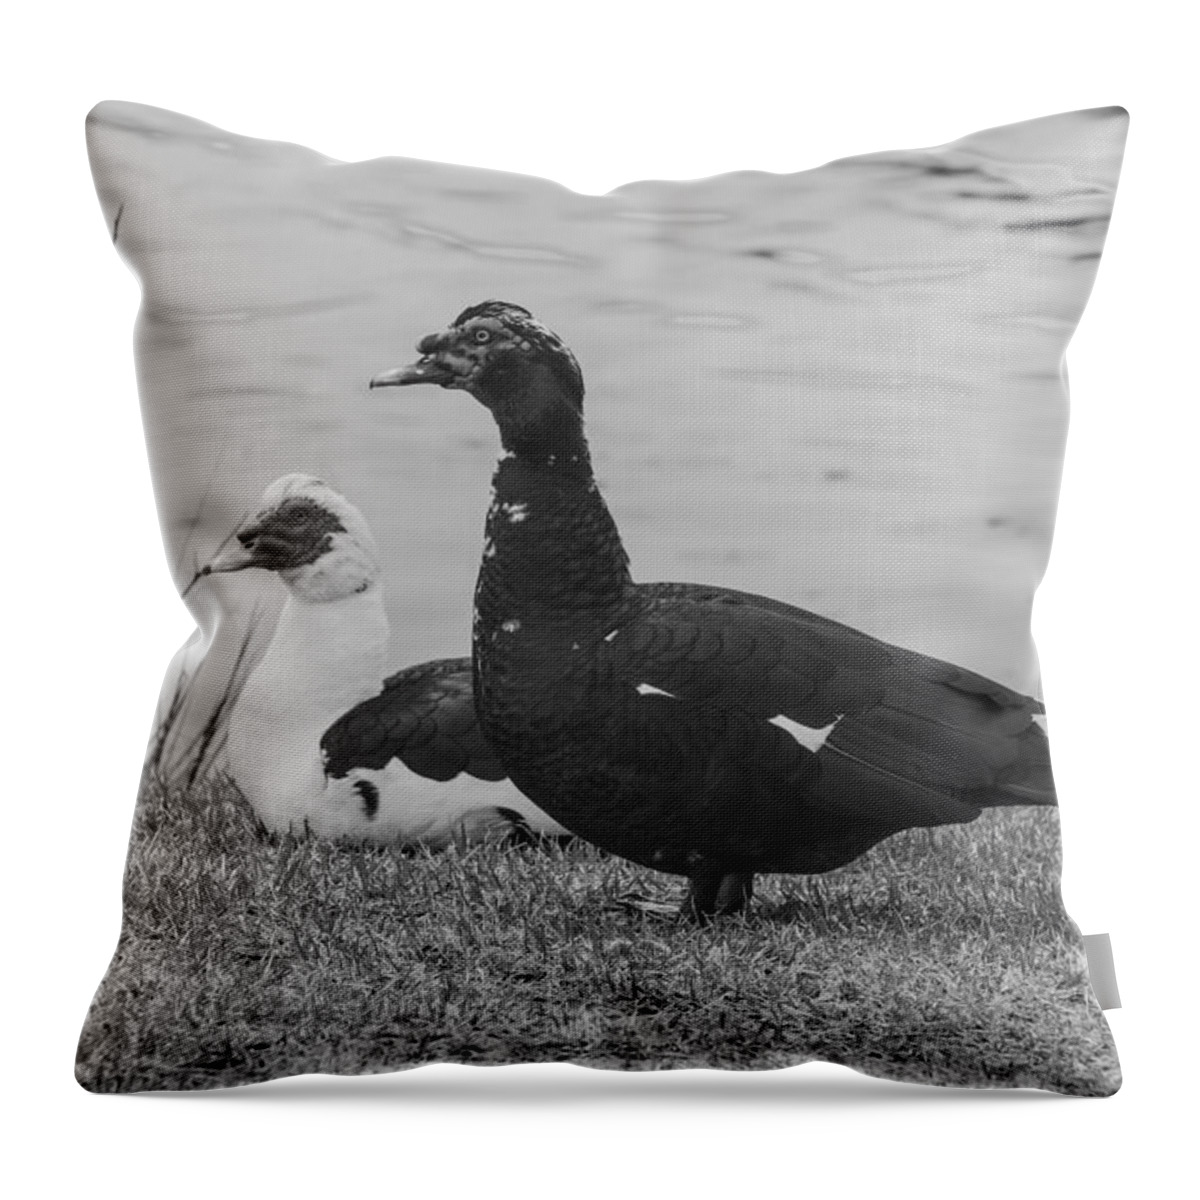 Black And White Throw Pillow featuring the photograph Black and White 10 by Jimmy McDonald